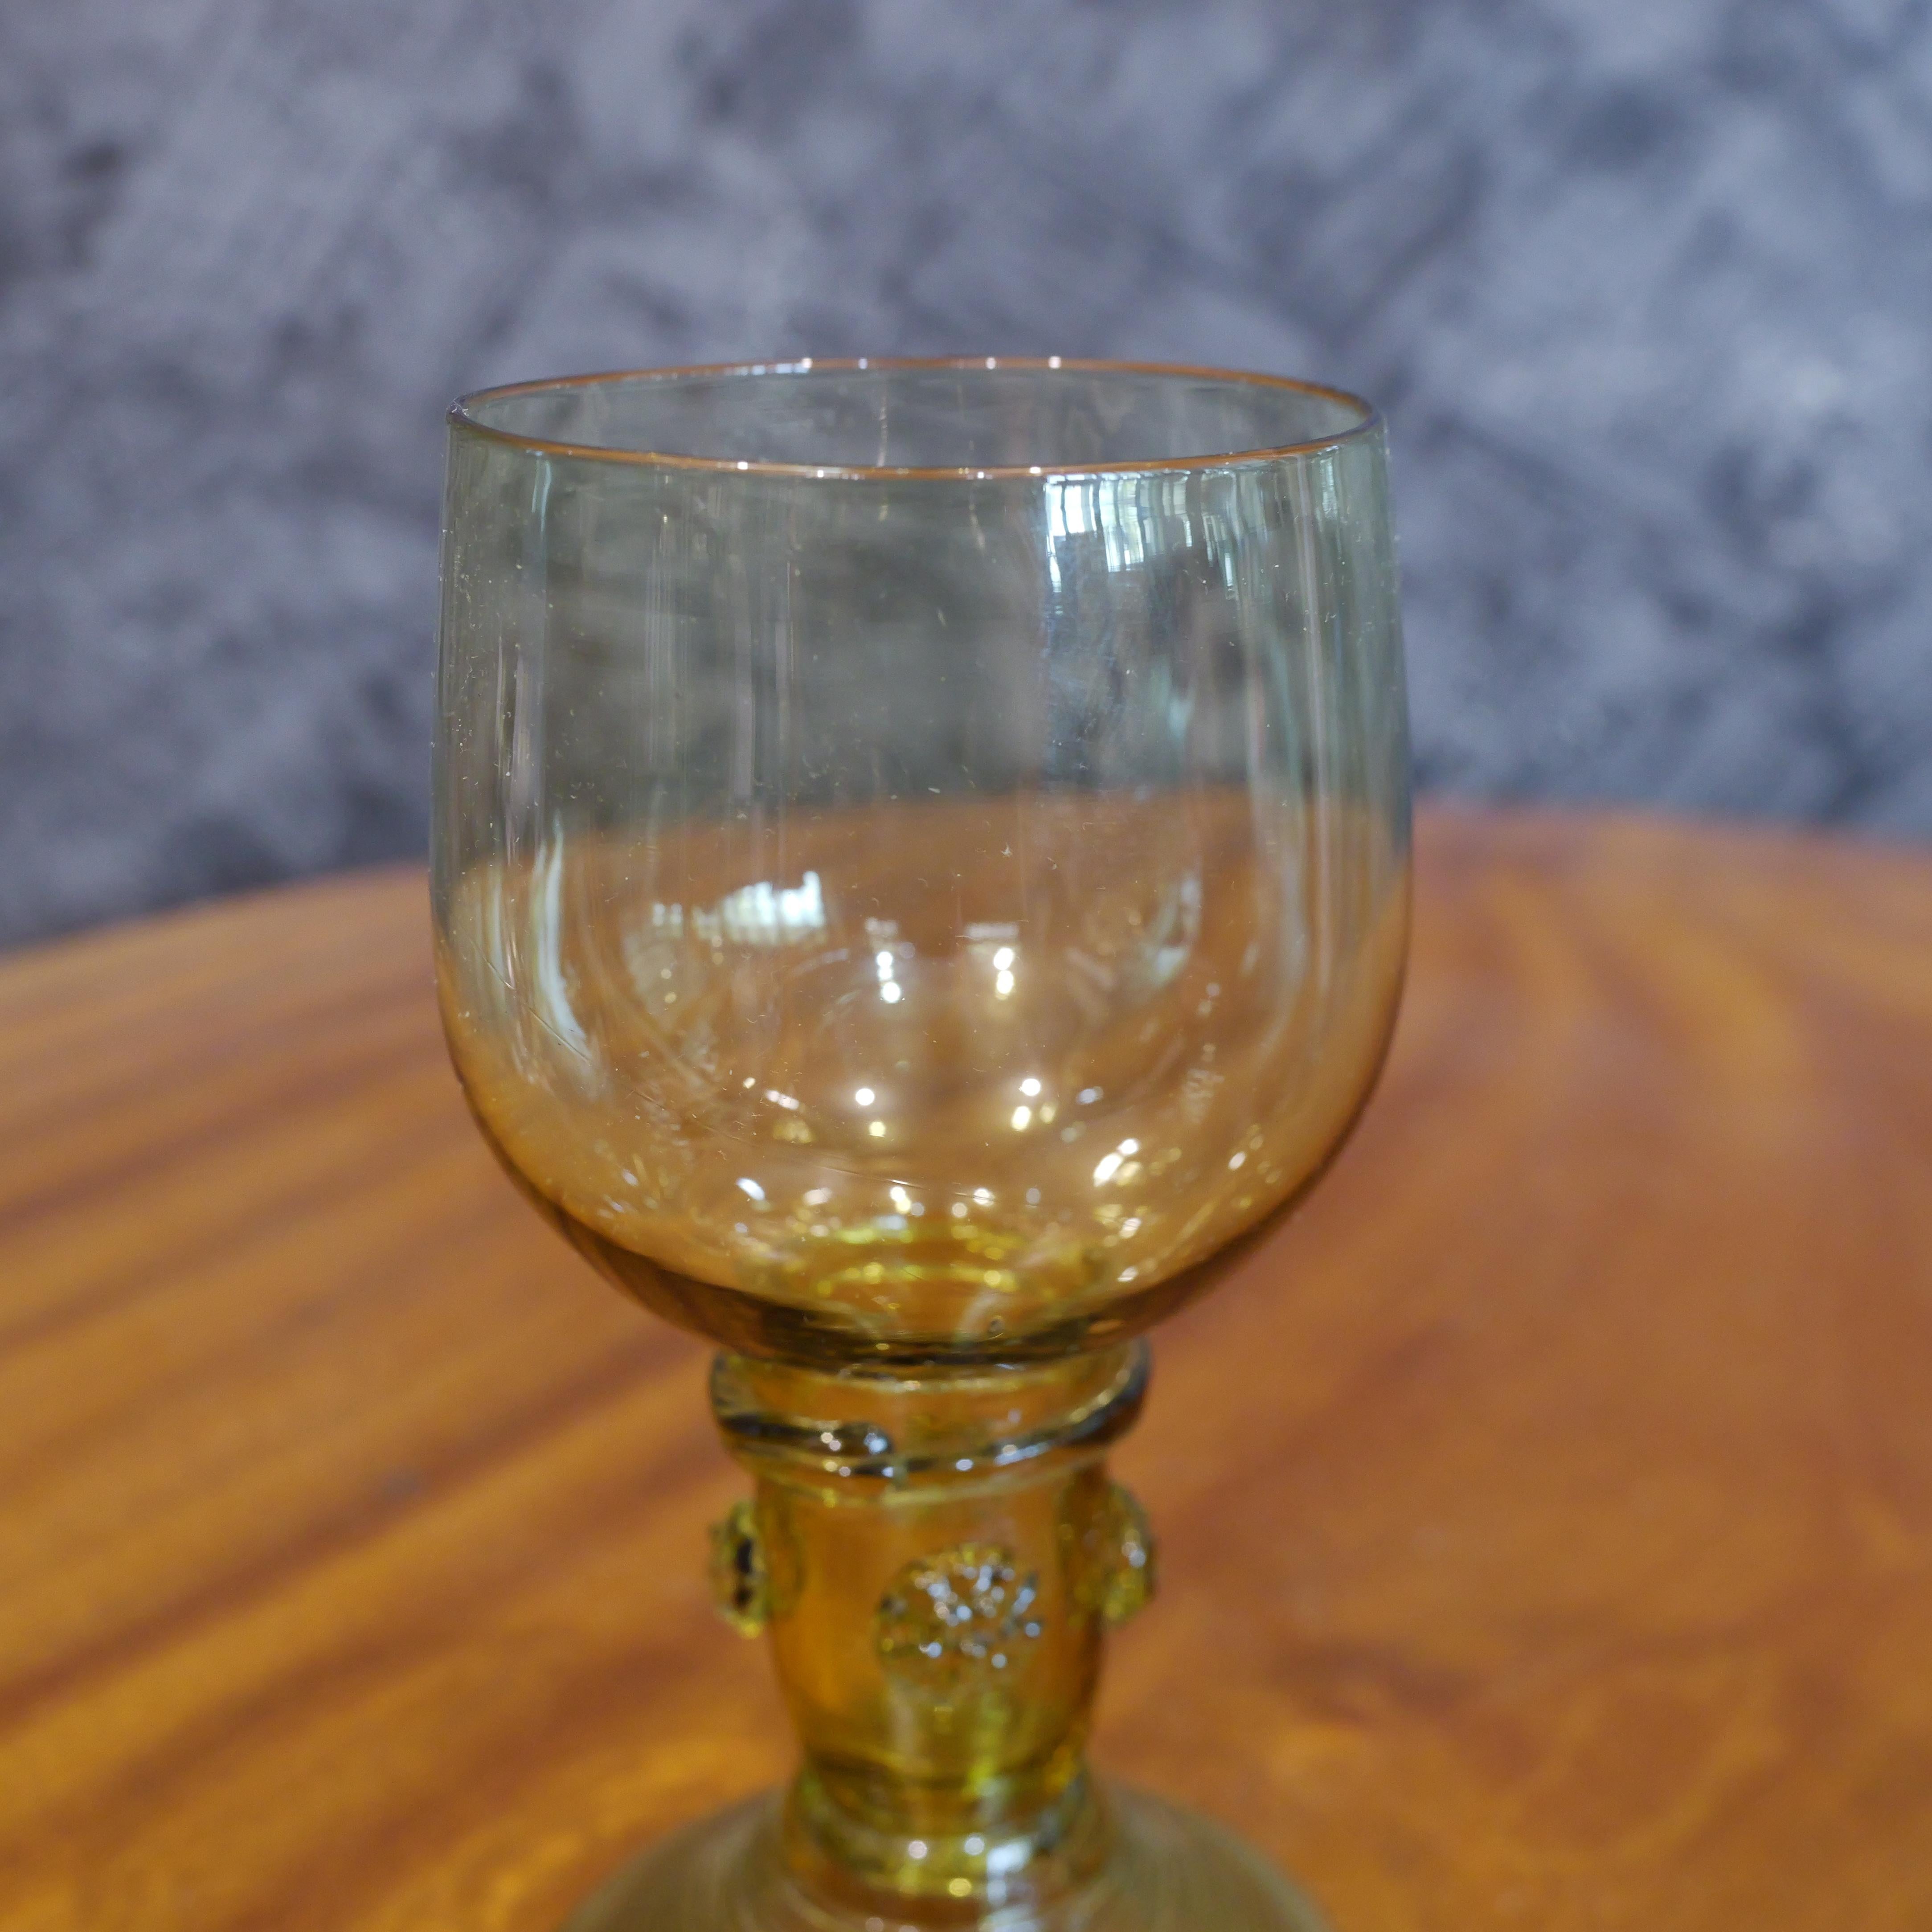 This 18th-century amber wine glass embodies the elegance and craftsmanship of the era. Its exquisite design features an ovoid bowl, delicately balanced atop an open, hollow stem. This unique stem design served a practical purpose, allowing sediment